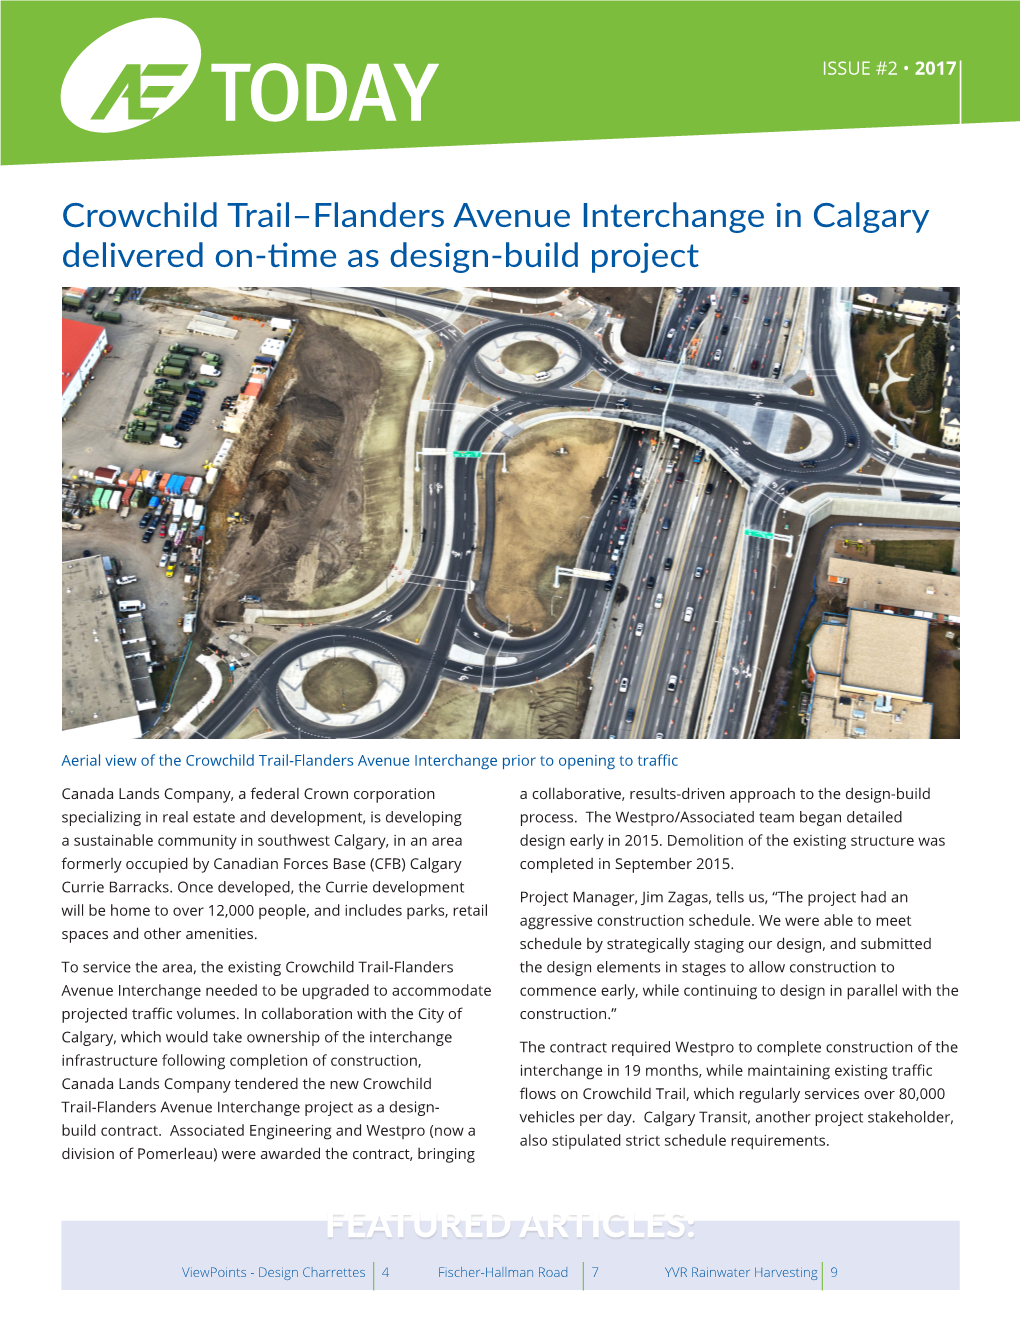 Crowchild Trail–Flanders Avenue Interchange in Calgary Delivered On-Time As Design-Build Project